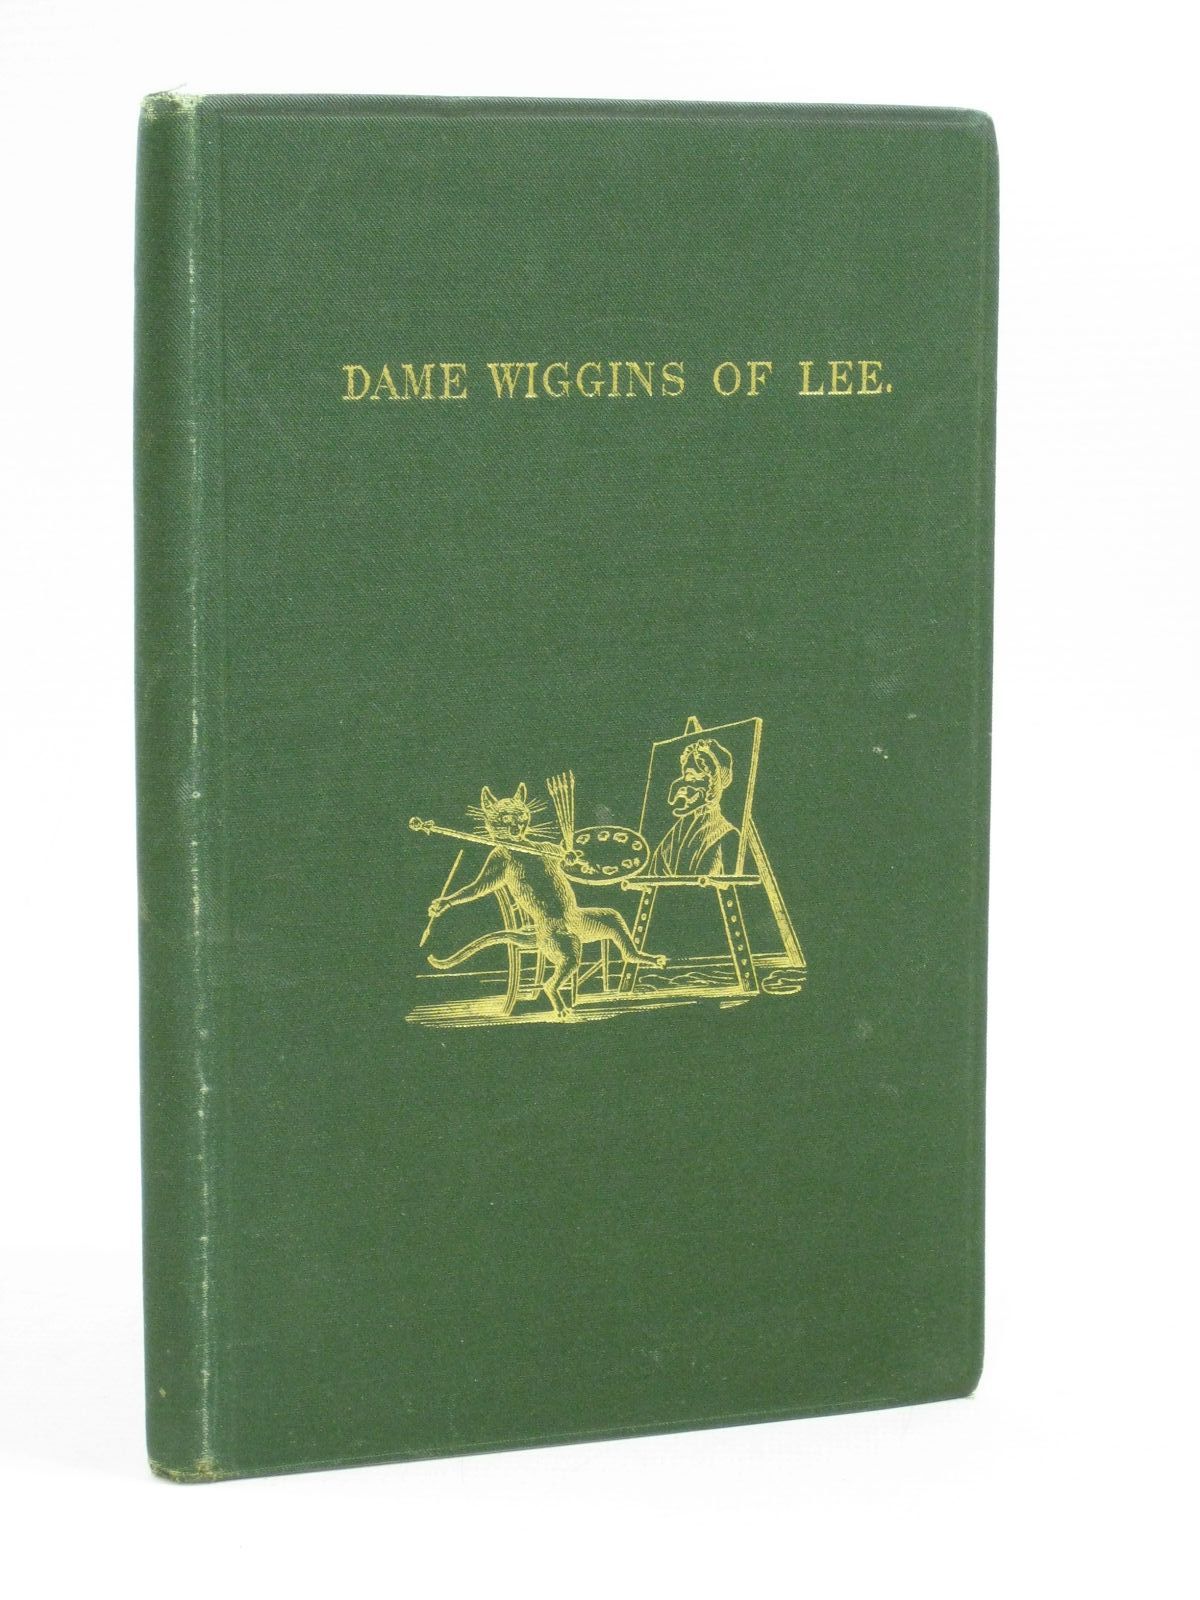 Photo of DAME WIGGINS OF LEE AND HER SEVEN WONDERFUL CATS written by Ruskin, John illustrated by Greenaway, Kate published by George Allen (STOCK CODE: 1314808)  for sale by Stella & Rose's Books